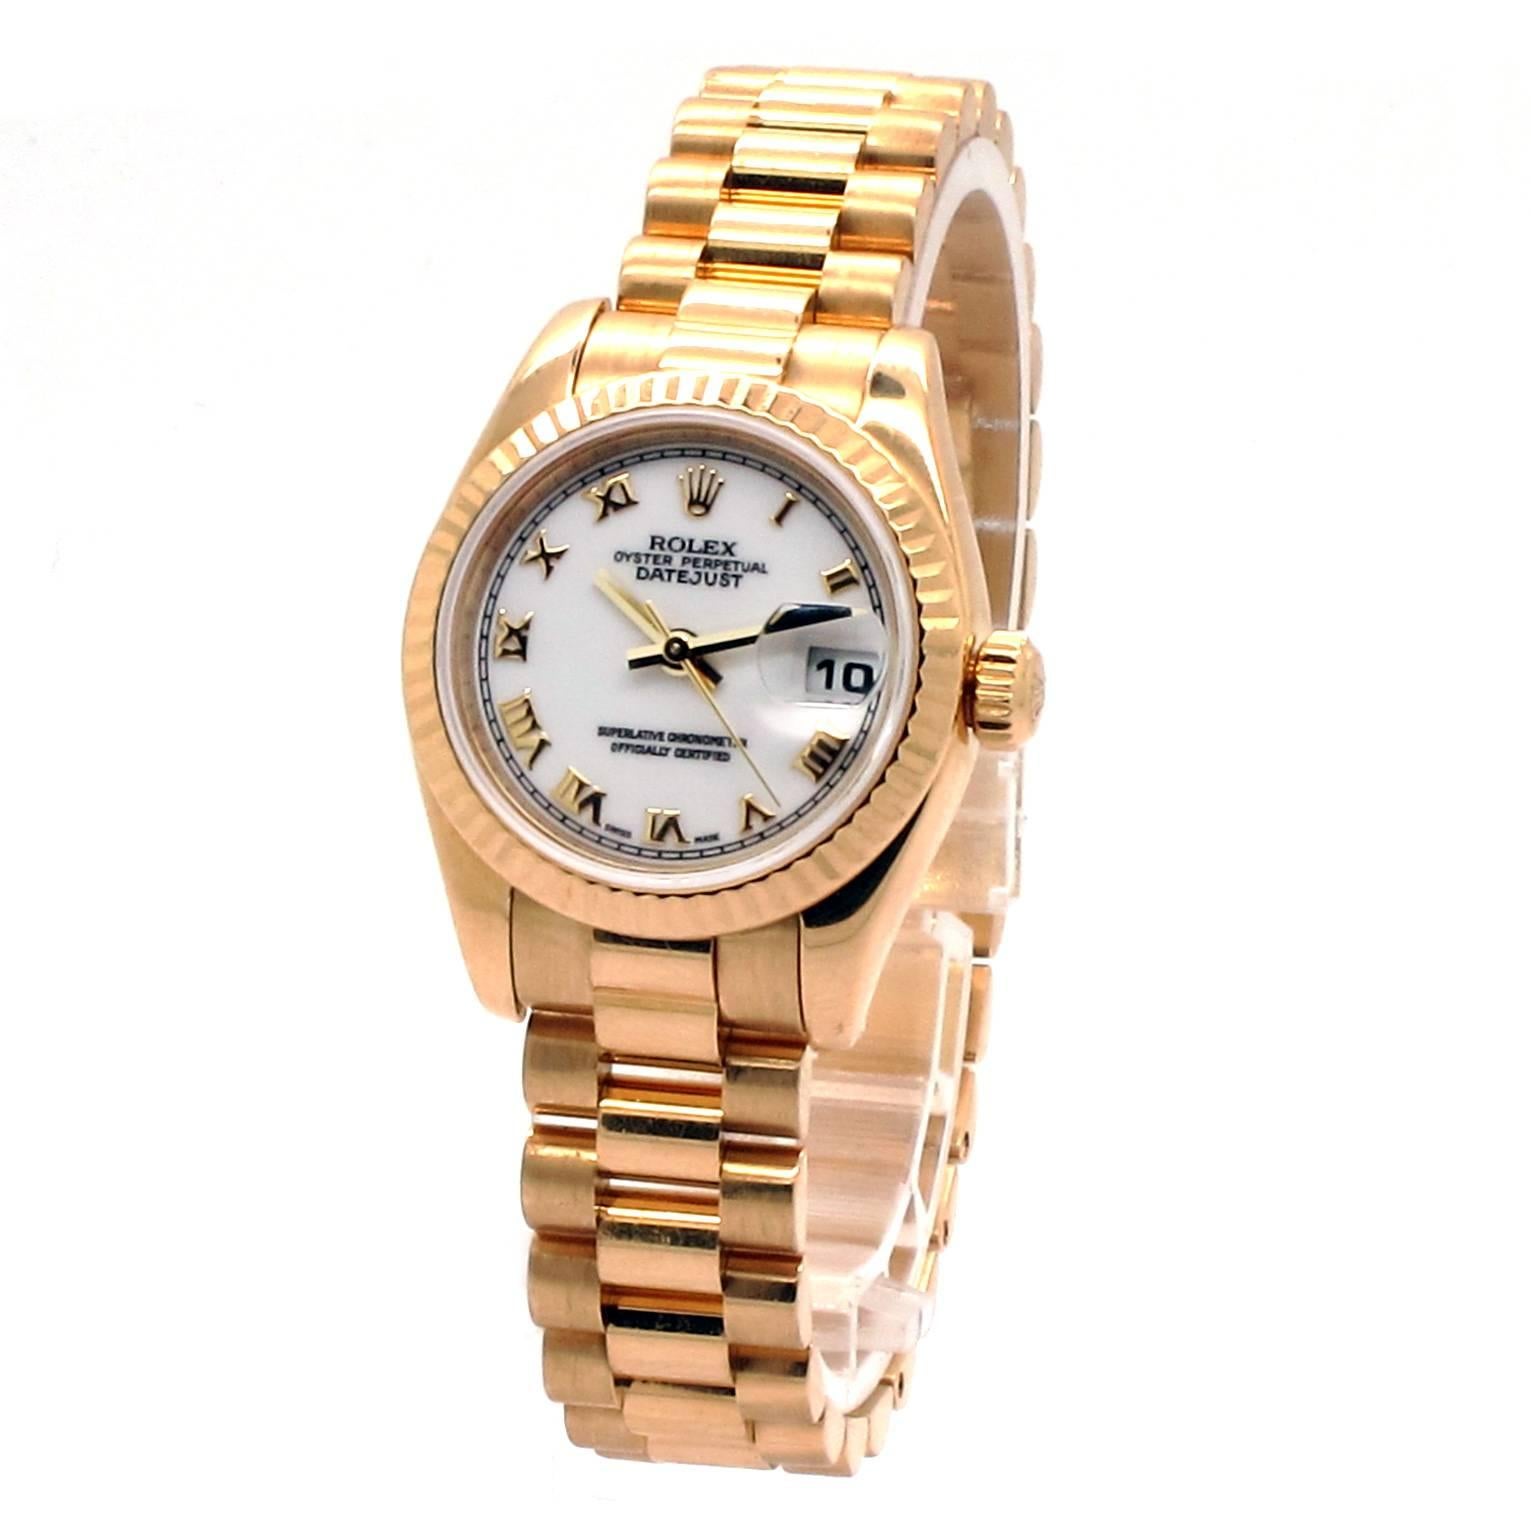 Rolex Datejust Ladies Presidential Watch with a round 26mm 18K yellow gold case with 18K yellow gold fluted bezel. White dial with gold roman numeral hour markers. 18K yellow gold president bracelet with hidden deployment buckle. Screw down crown.